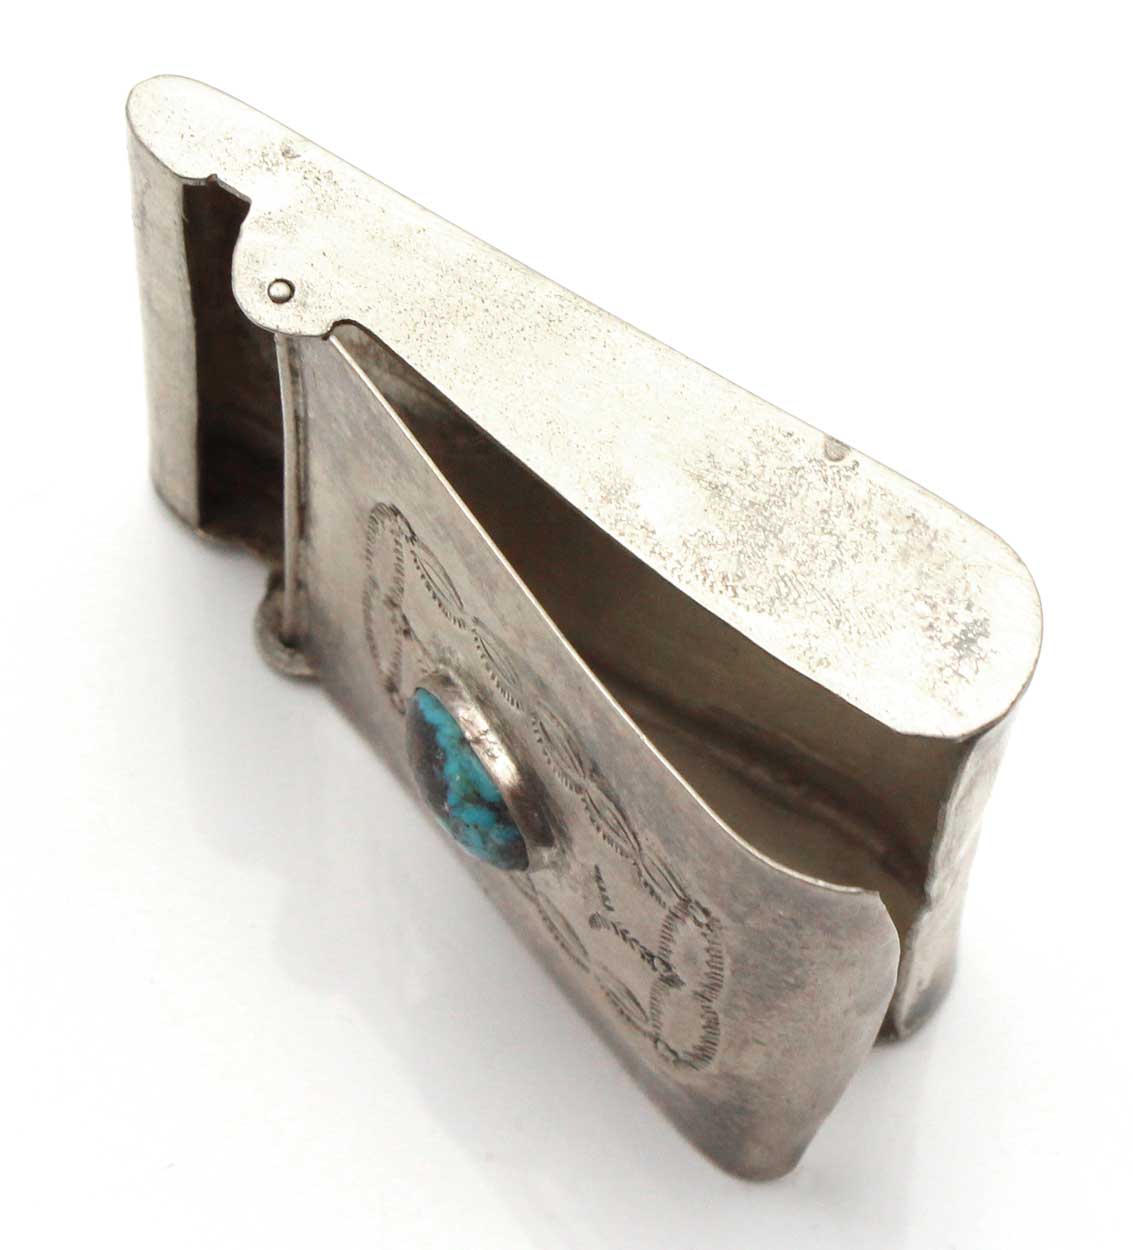 Stamped Silver & Turquoise Match Book Cover